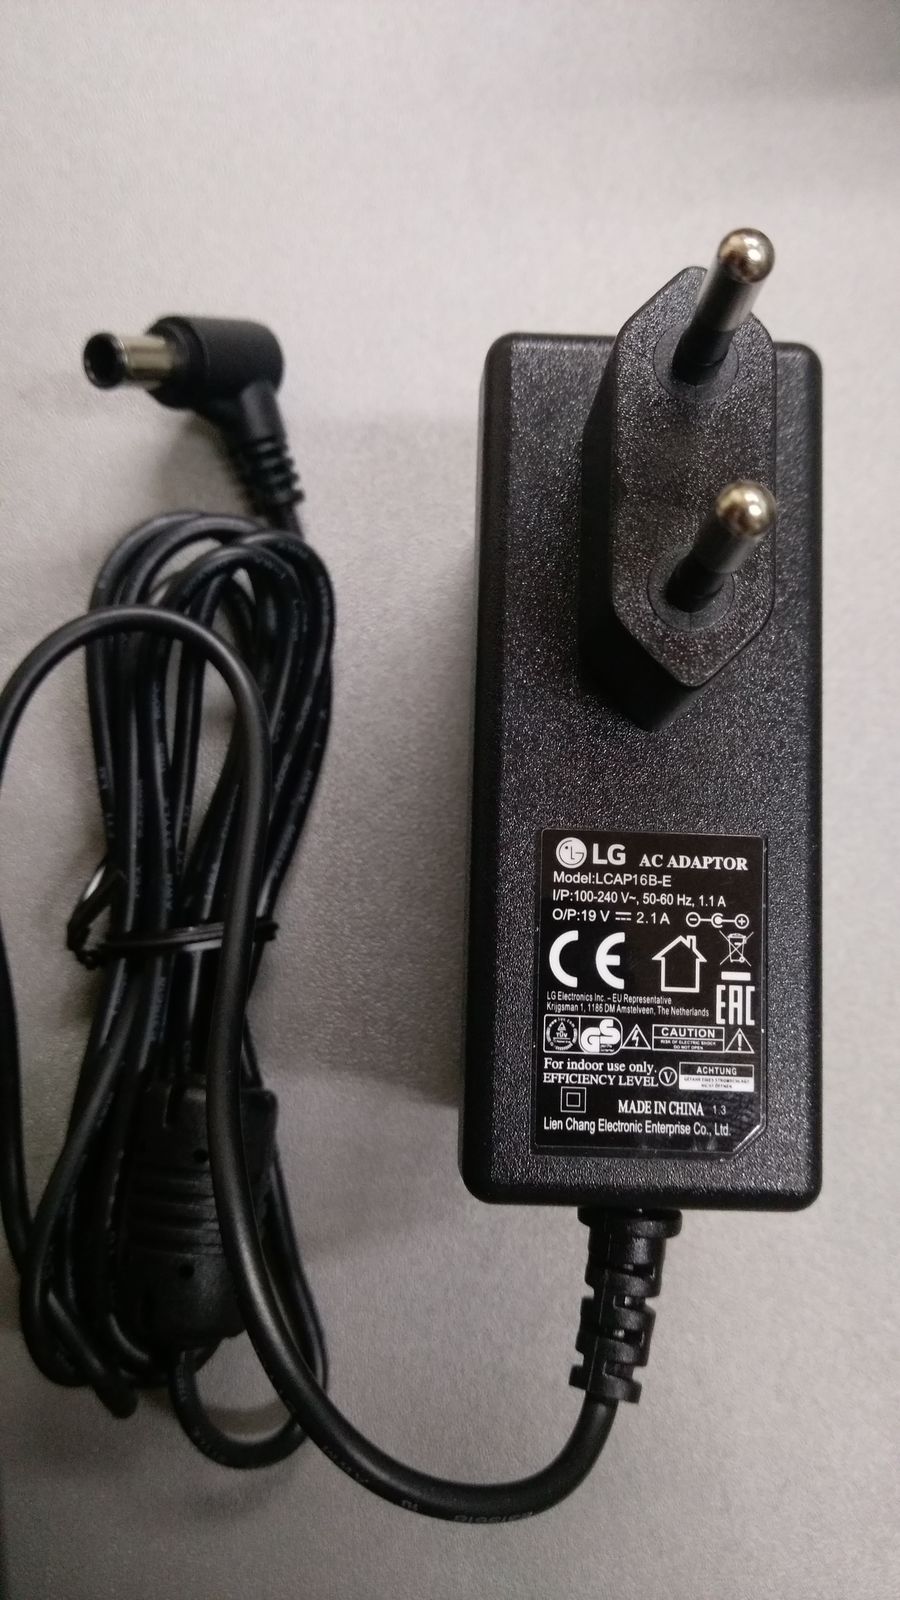 New LG 19V 2.1A AC Adapter LCAP16B-E For BEUQLUP 24LB457B-ZF Power Supply